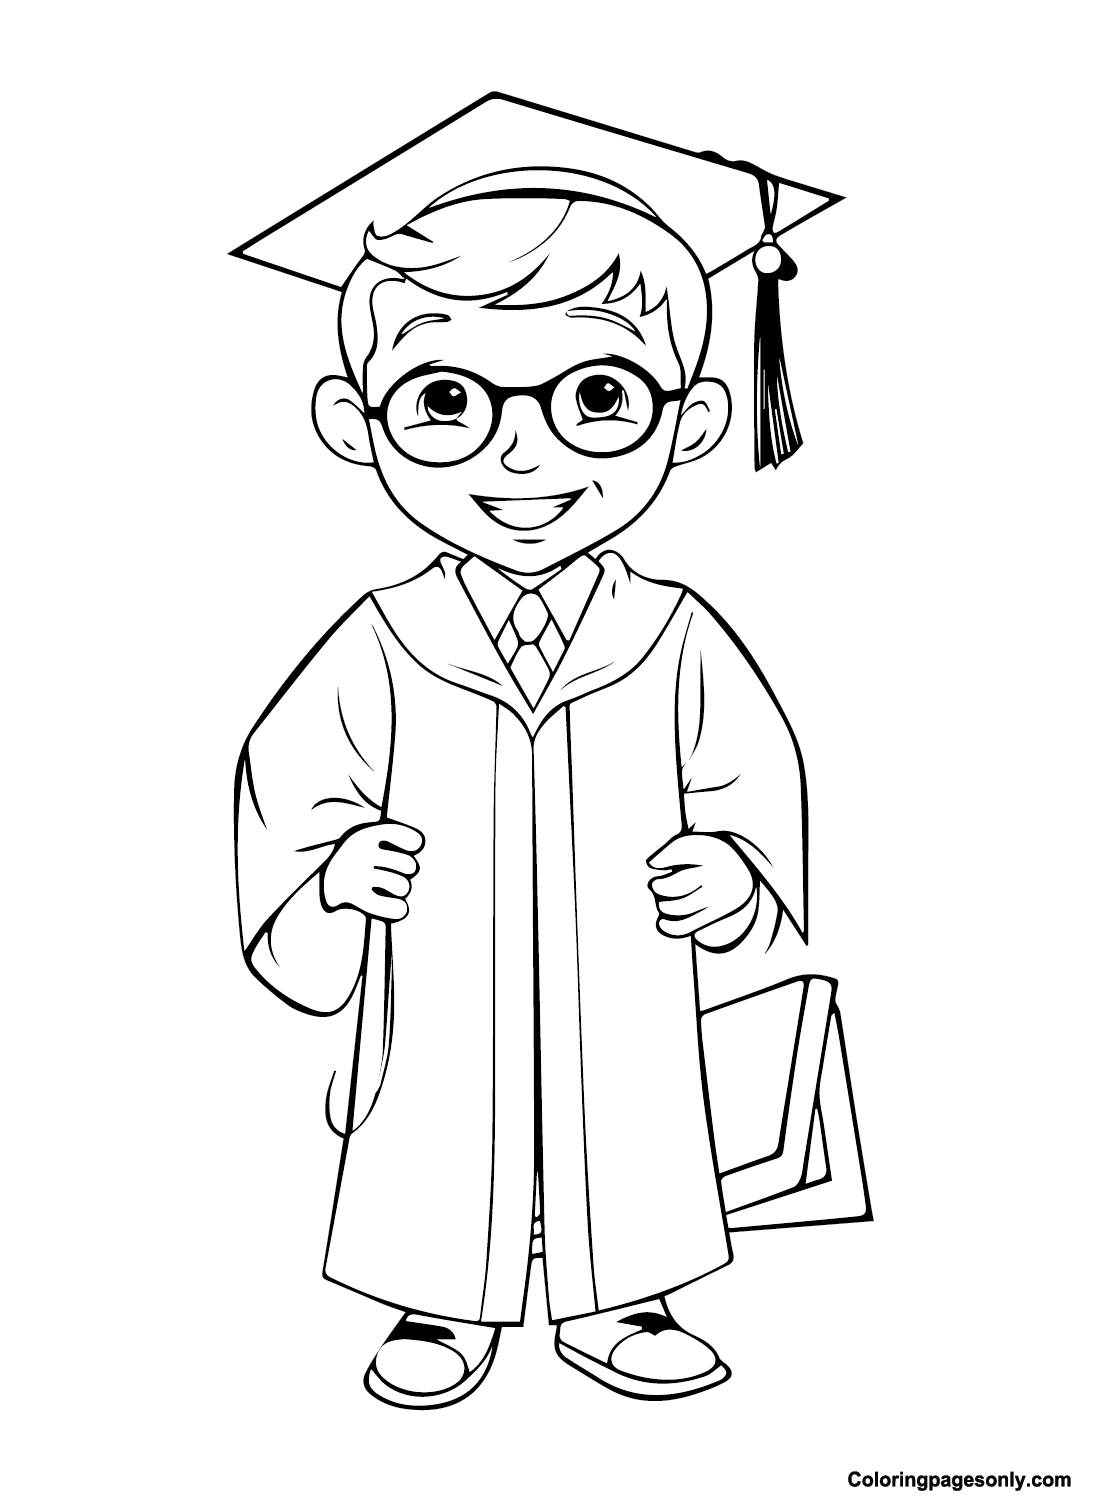 Print Last Day of School Coloring Page